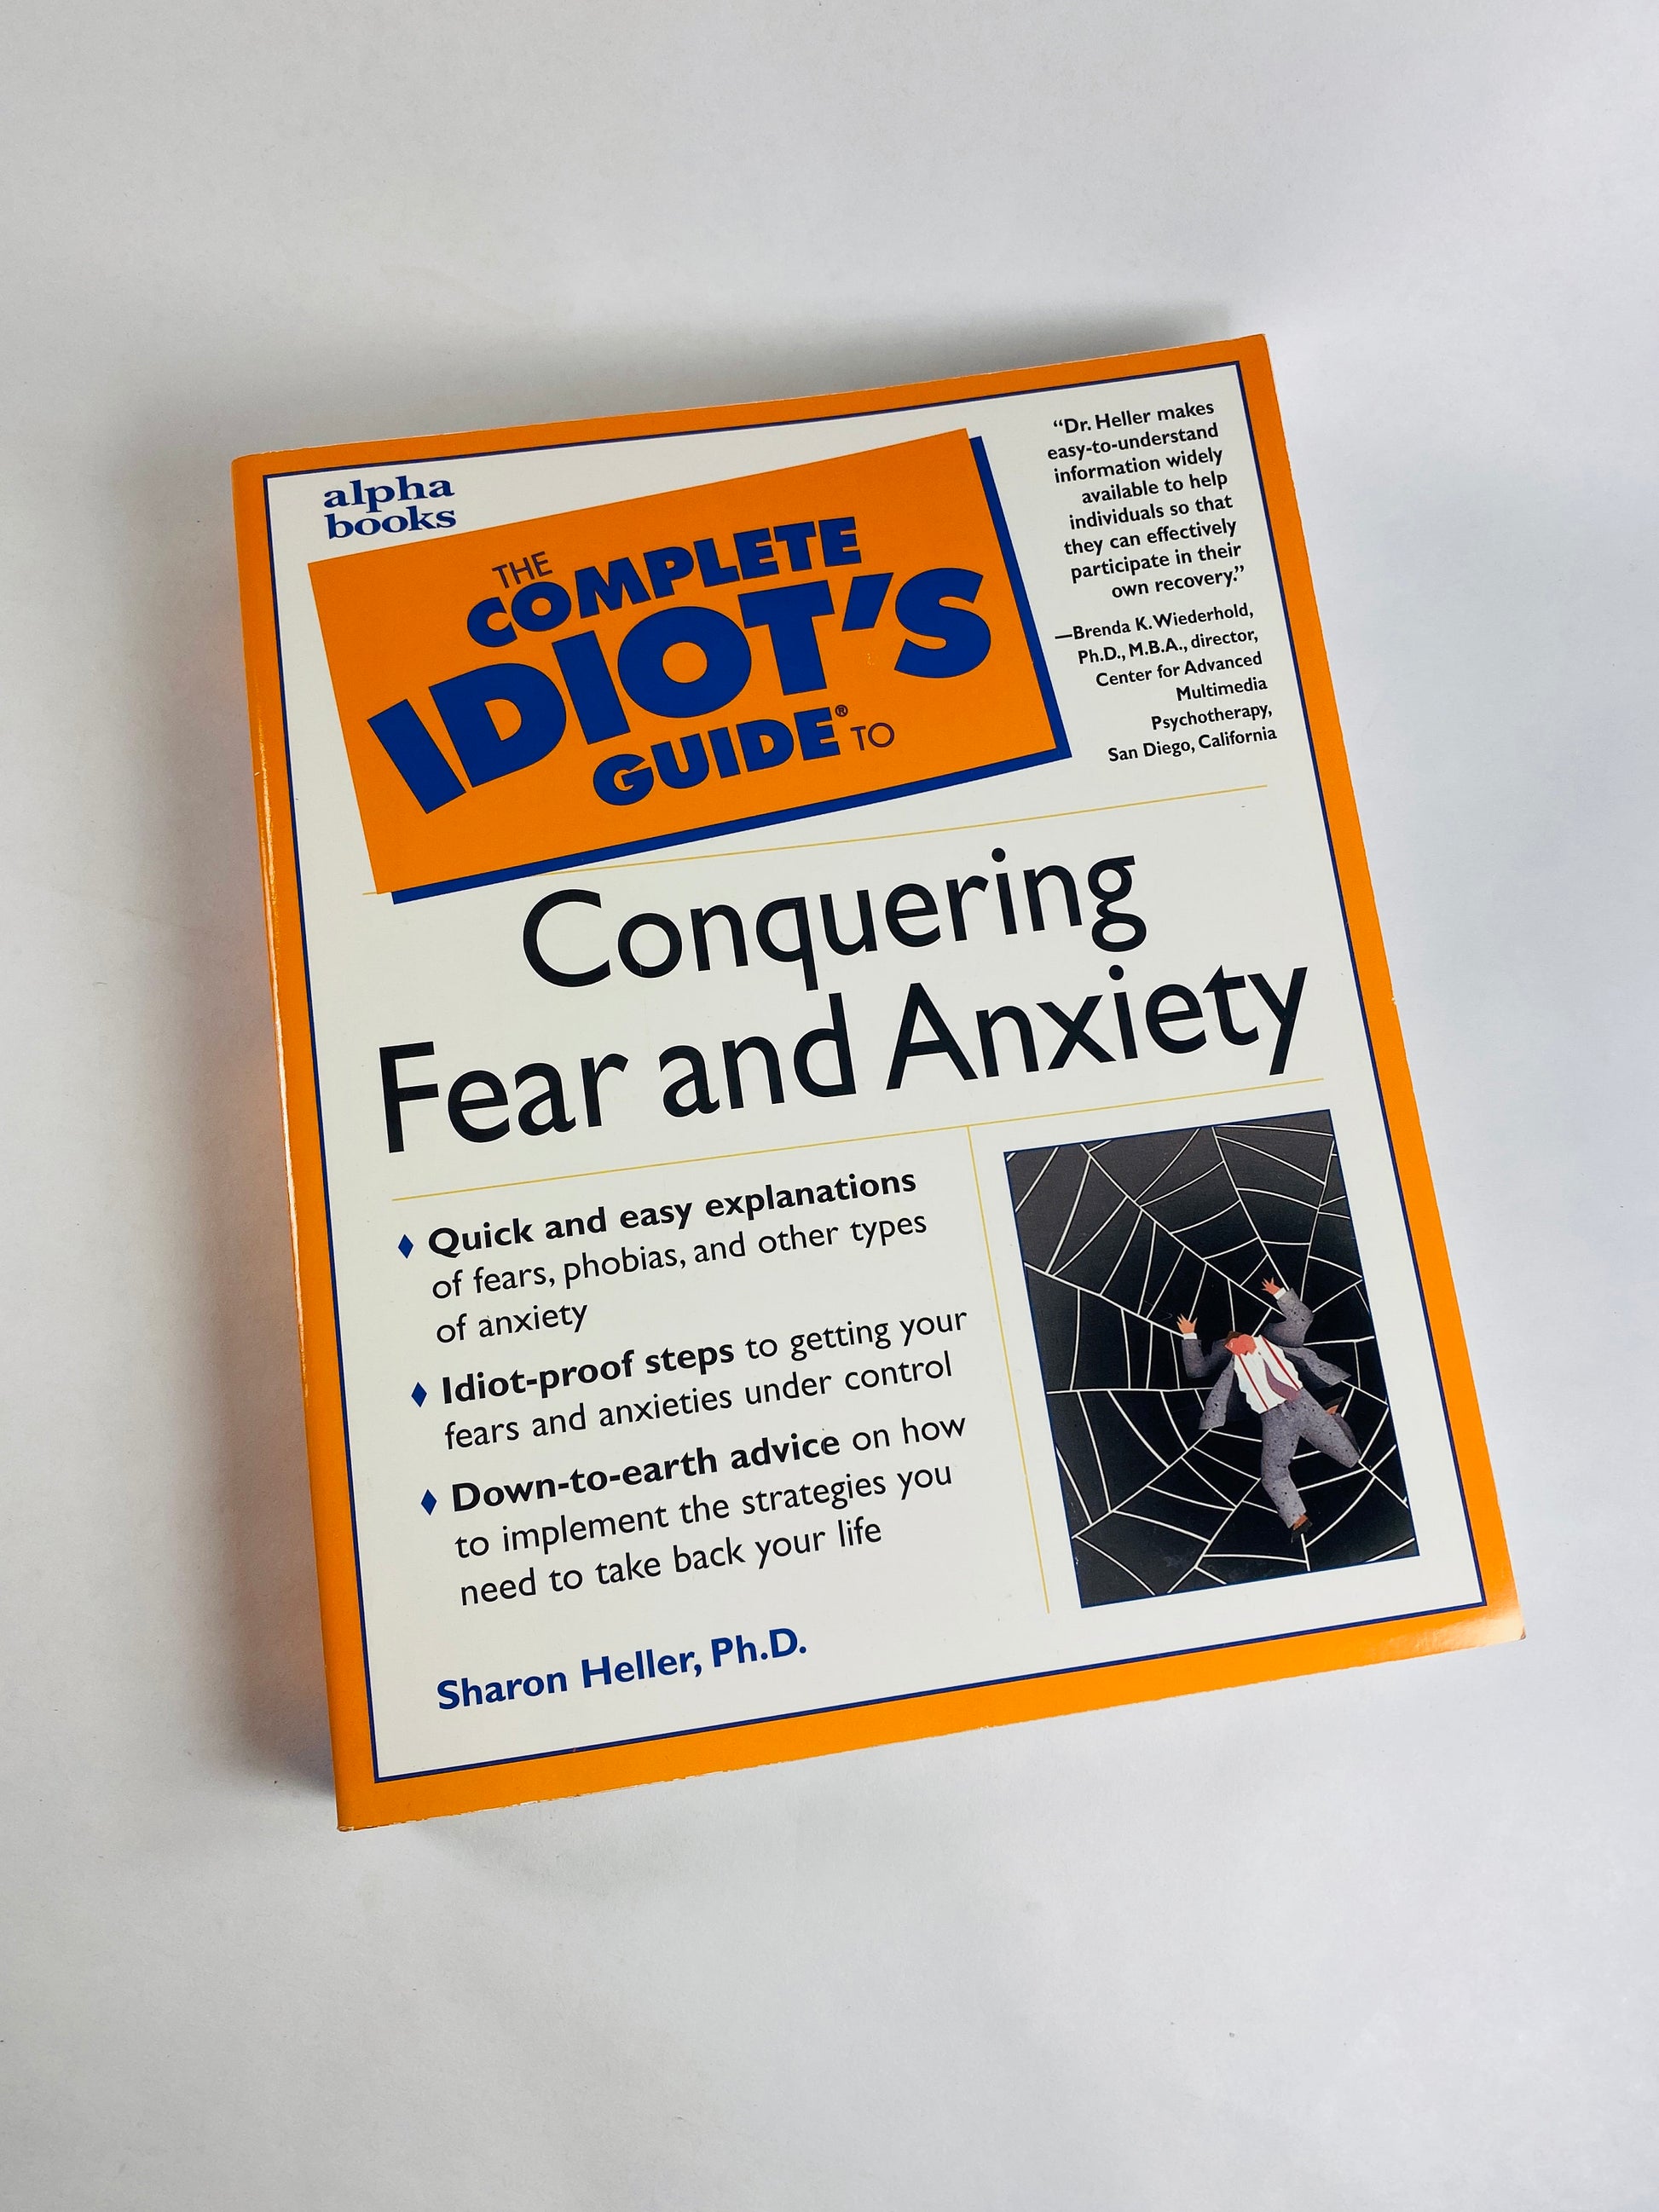 Idiot’s Guide to Conquering Fear and Anxiety vintage paperback book by Sharon Heller reference guide nervous terror and management